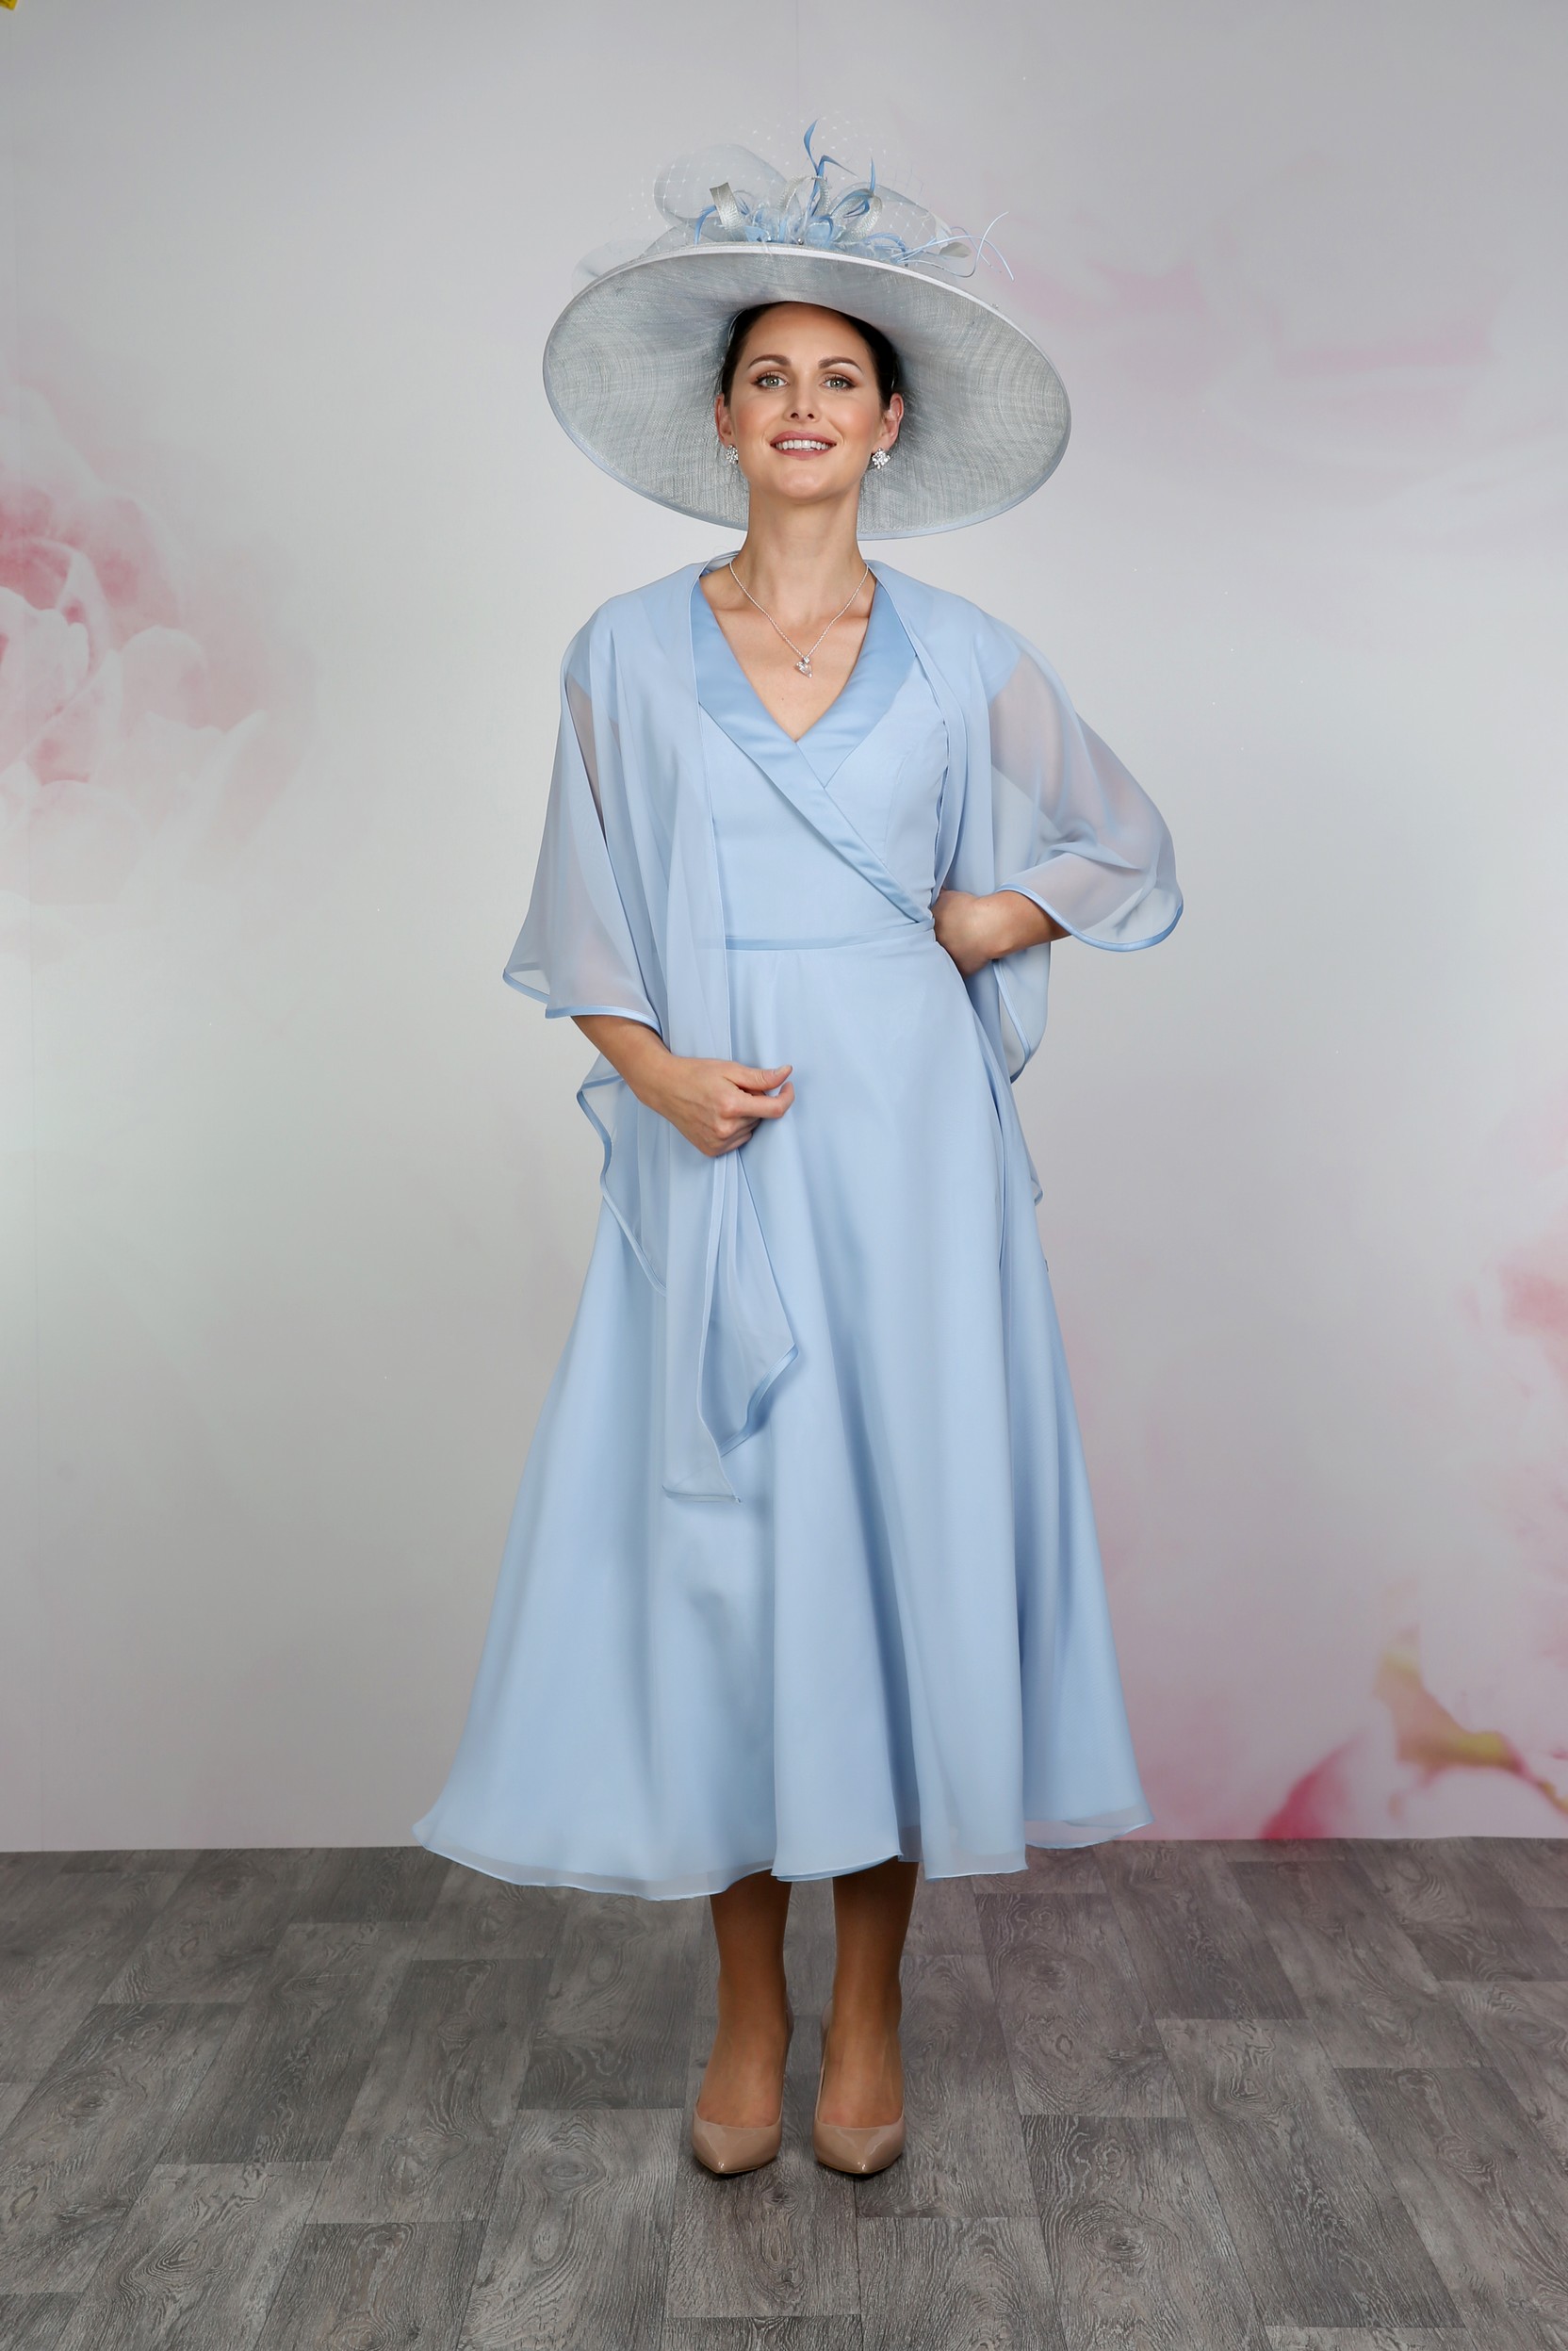 The elegant and modern Astrid dress makes for a clever presentation for the Mother of the Bride